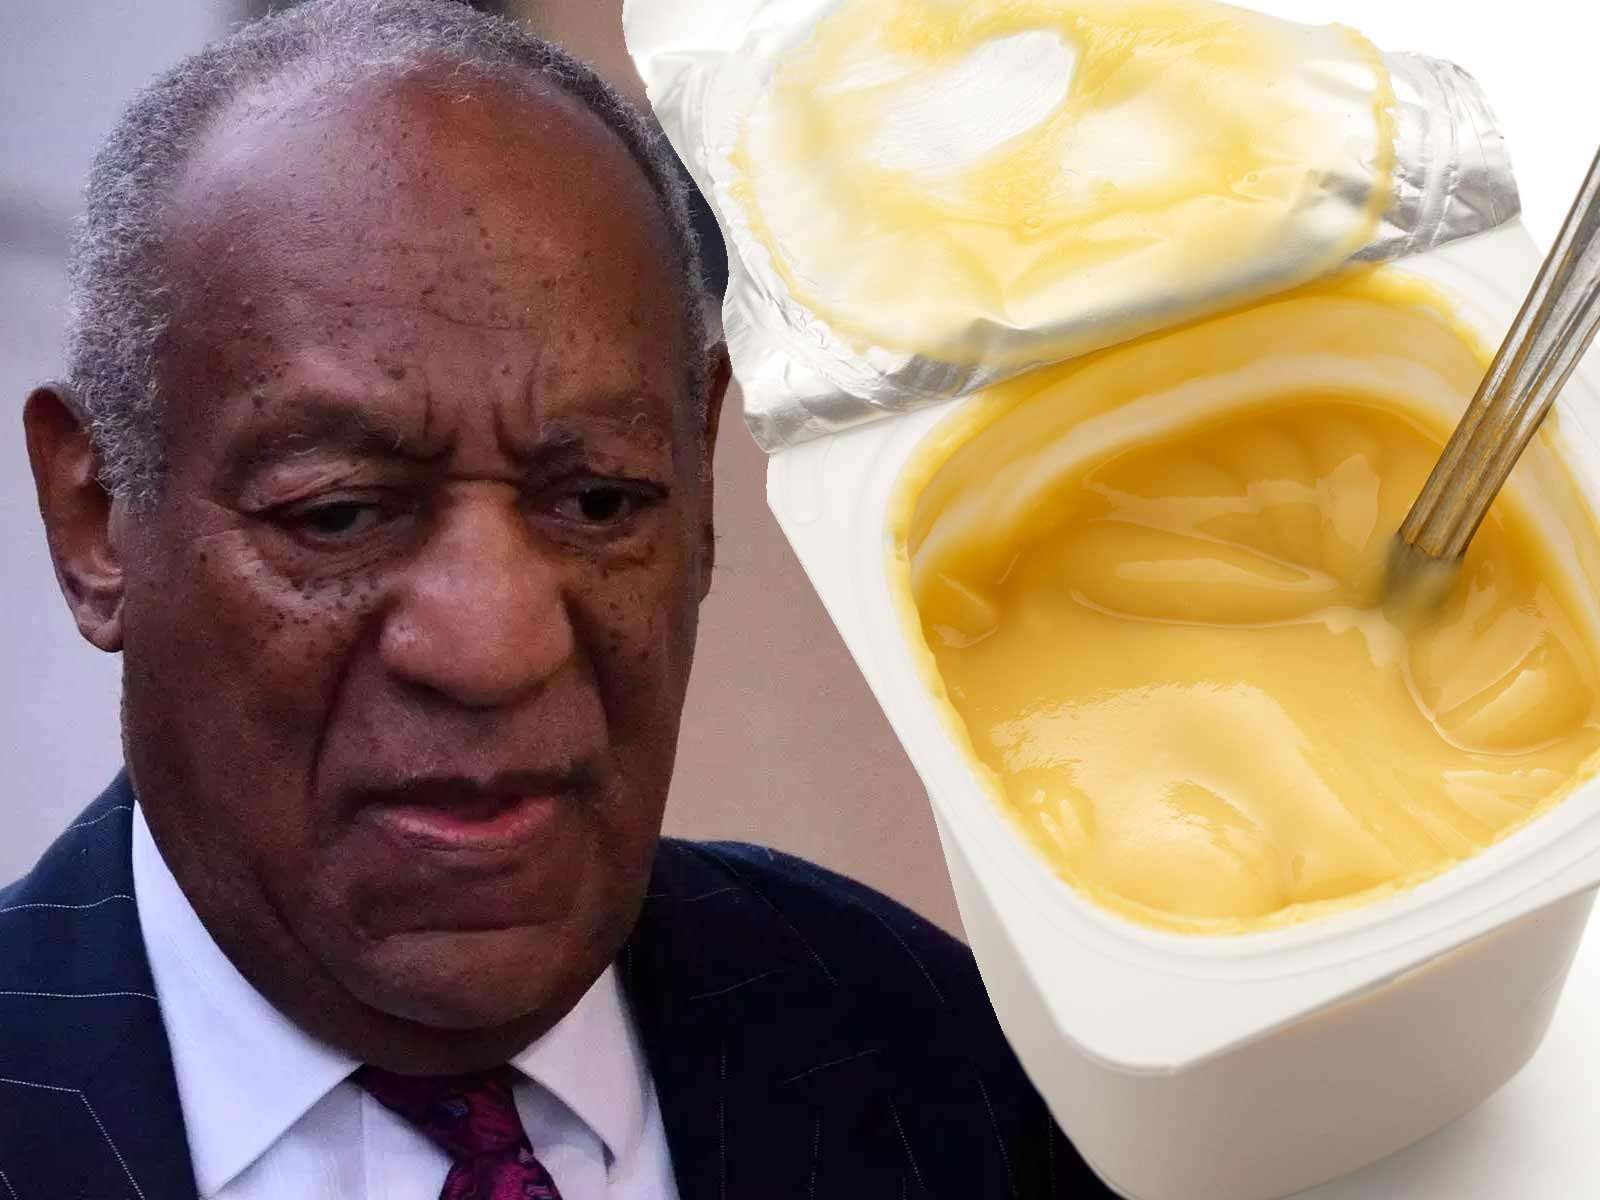 image for Bill Cosby Gets Vanilla Pudding in Jail for First Meal Behind Bars